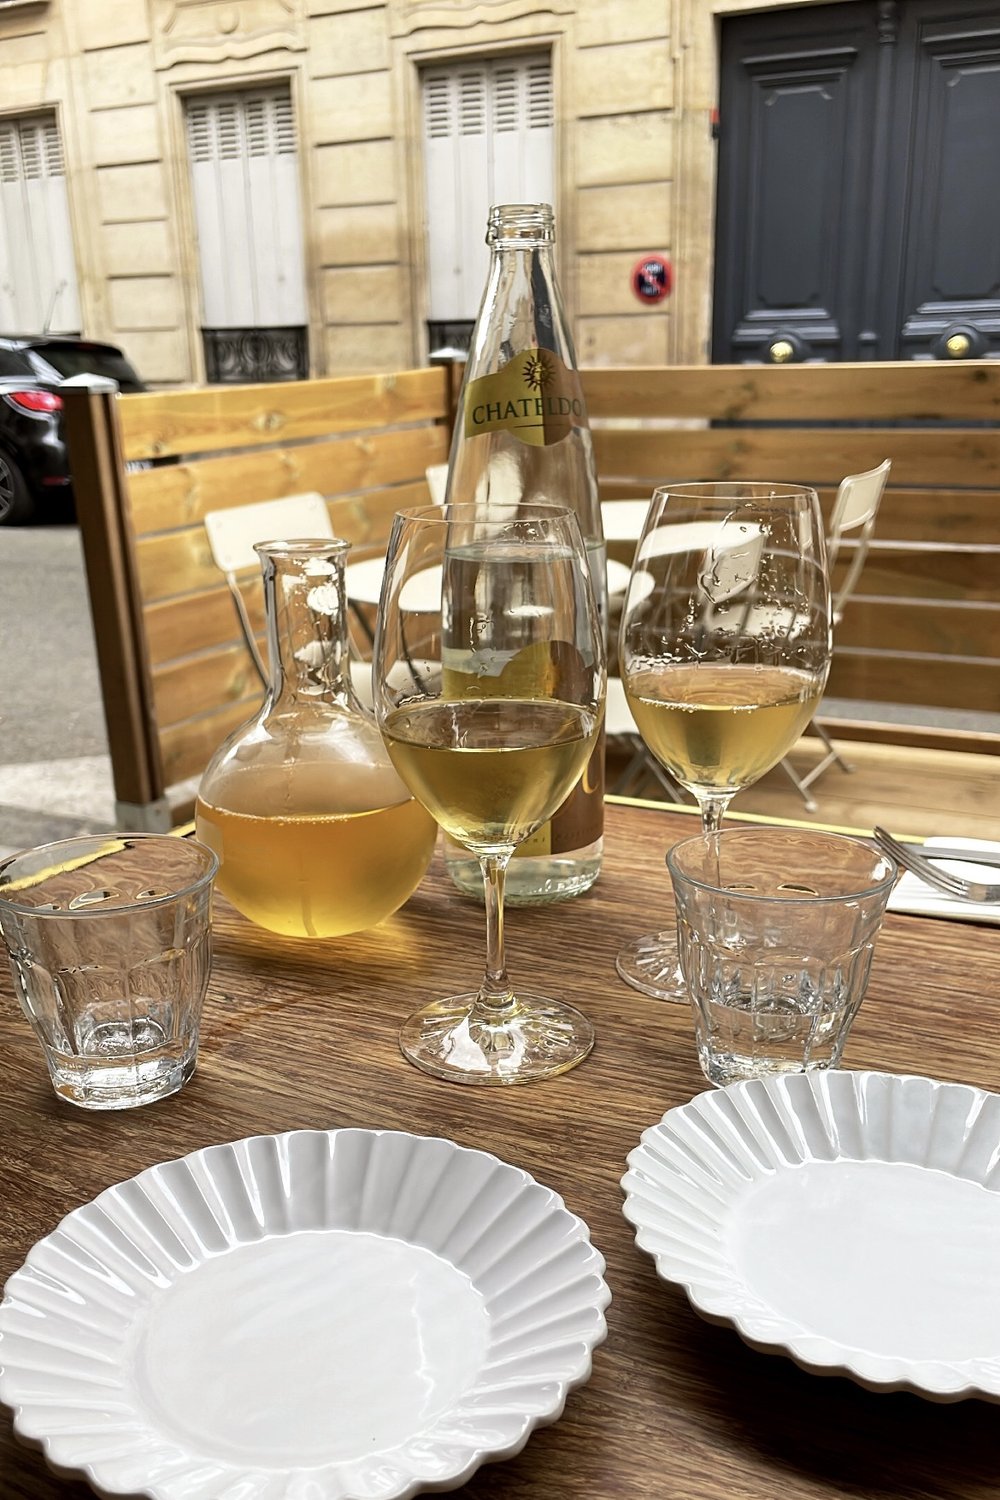  Served with a delicious  2018 Chardonnay from Jérôme Arnoux  